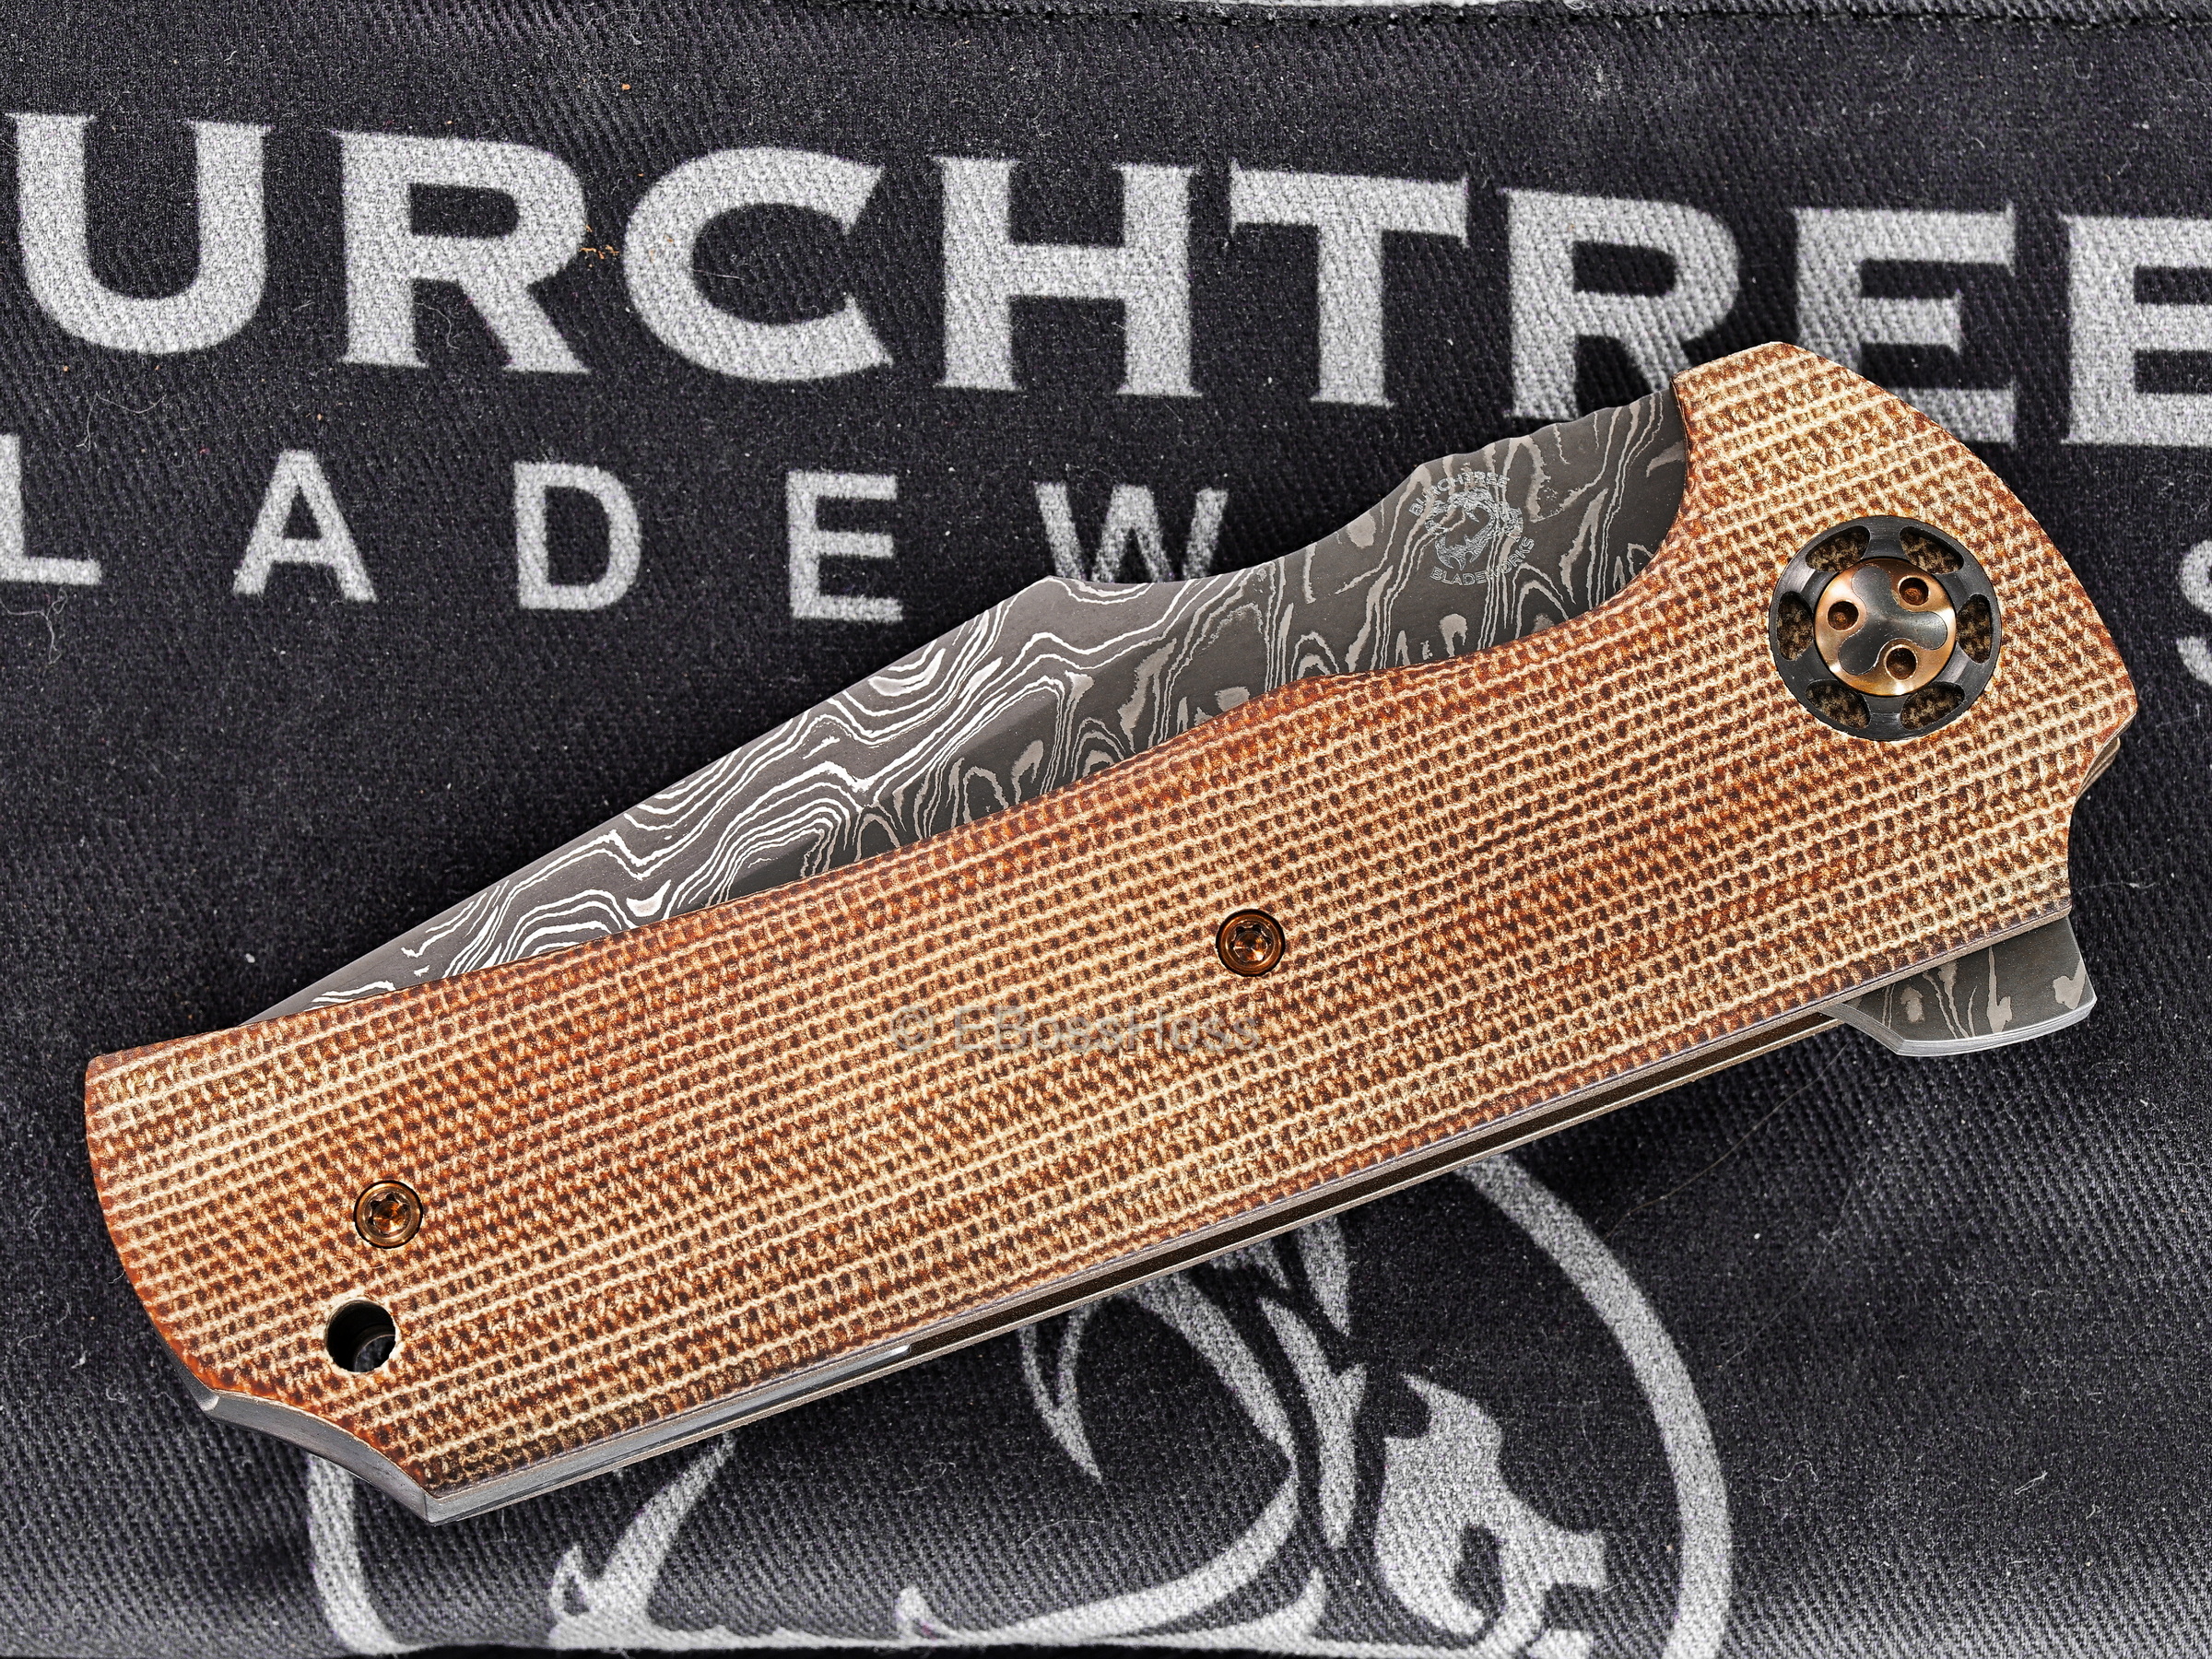 Burchtree Bladeworks Custom Deluxe No Name Flipper by Michael Burch